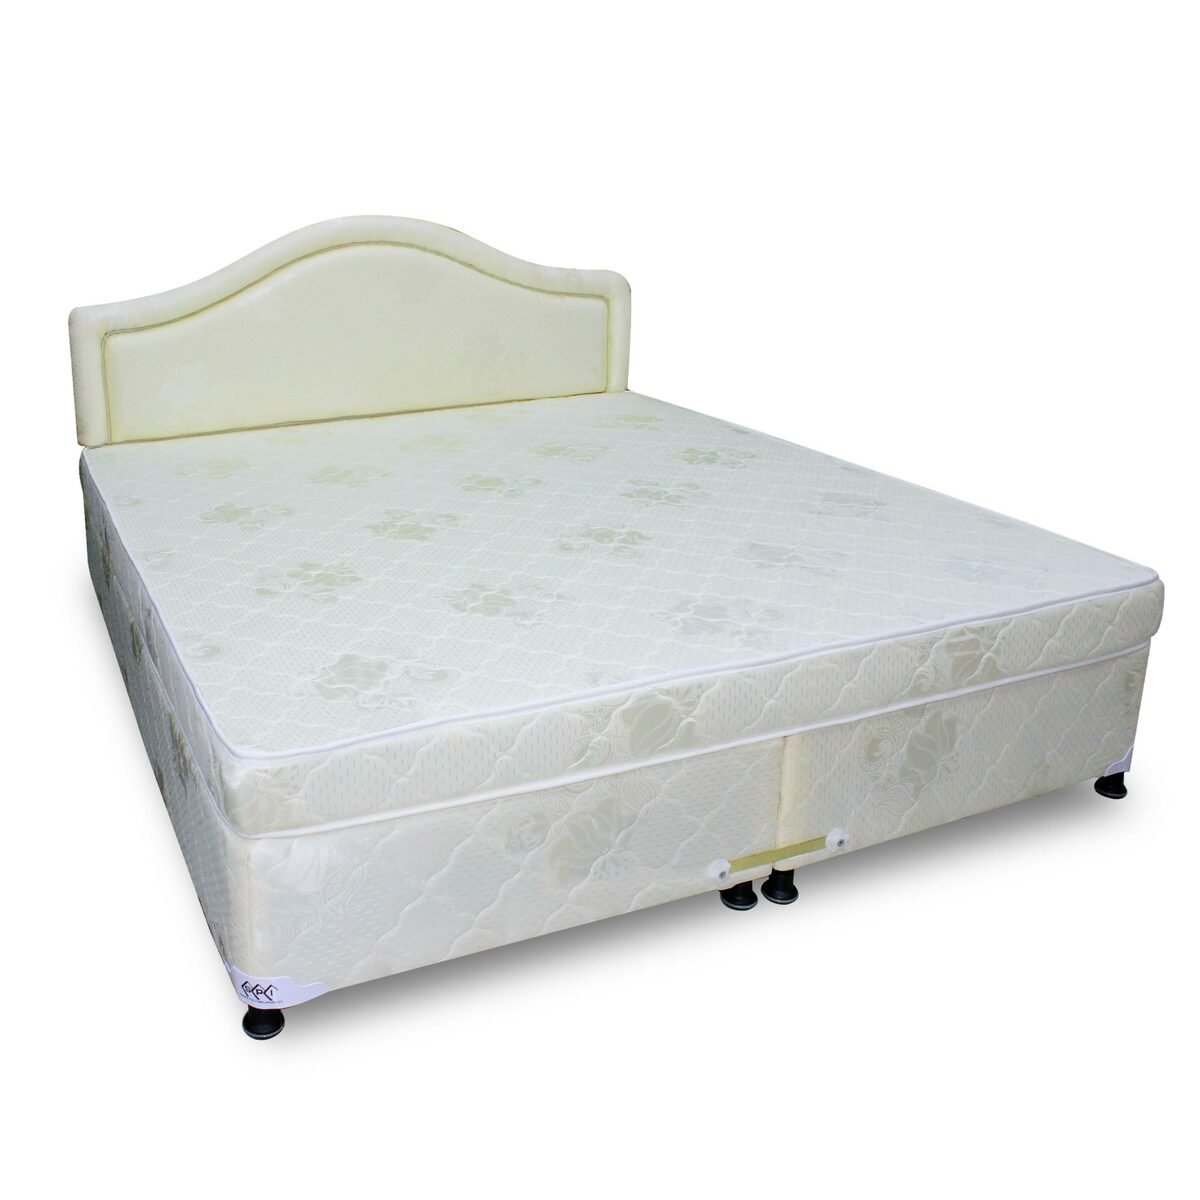 Sohar Poly Semi Medicatted Divan Bed 190x180+12cm(( Head Board With Base )